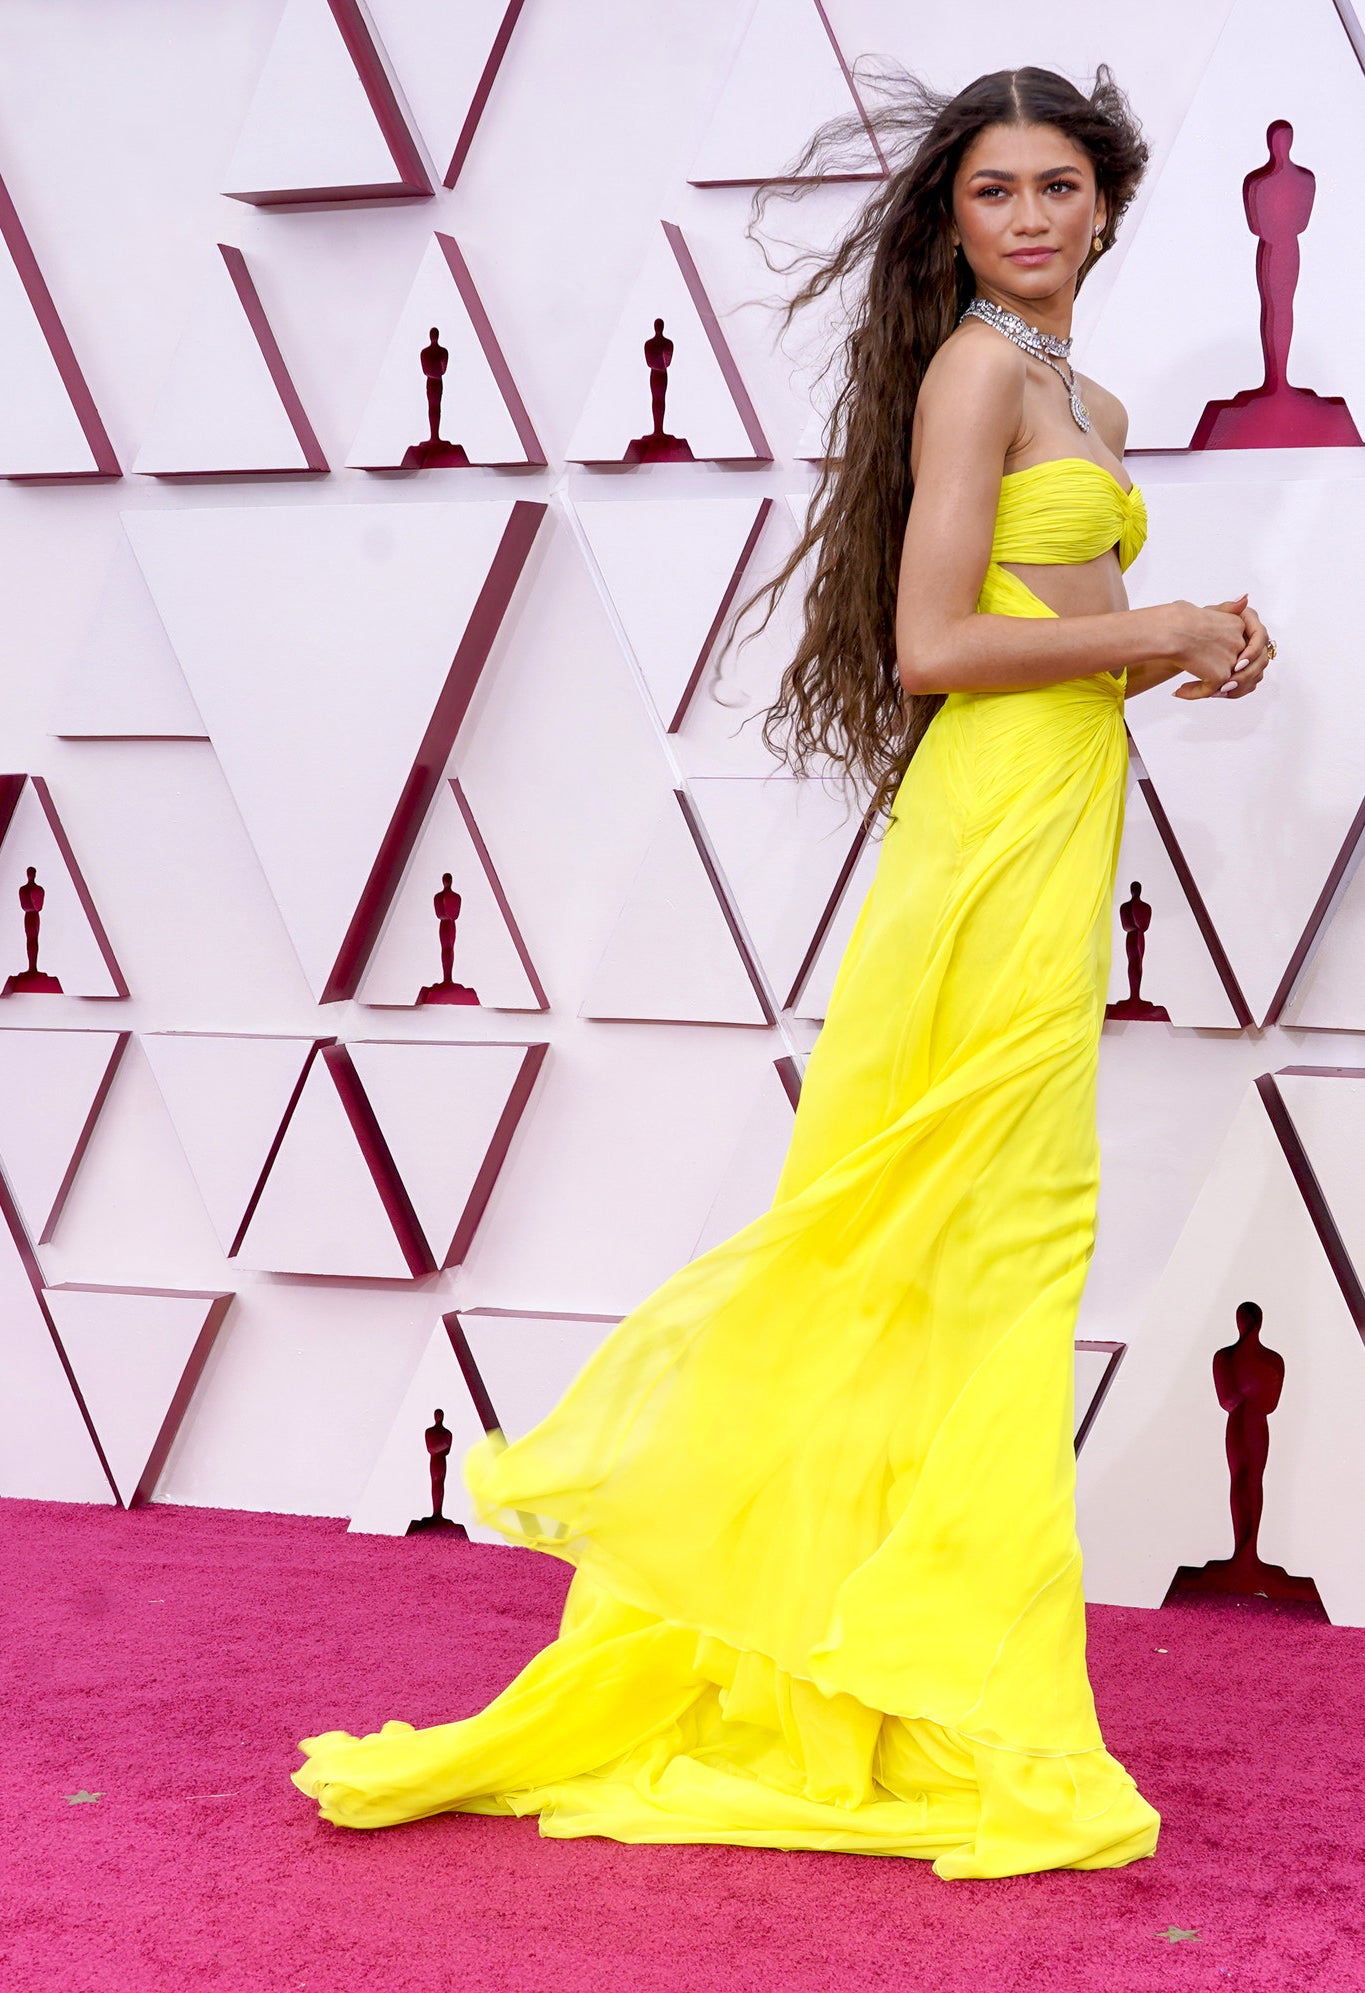 Zendaya wearing a bright yellow gown and her hair flowing